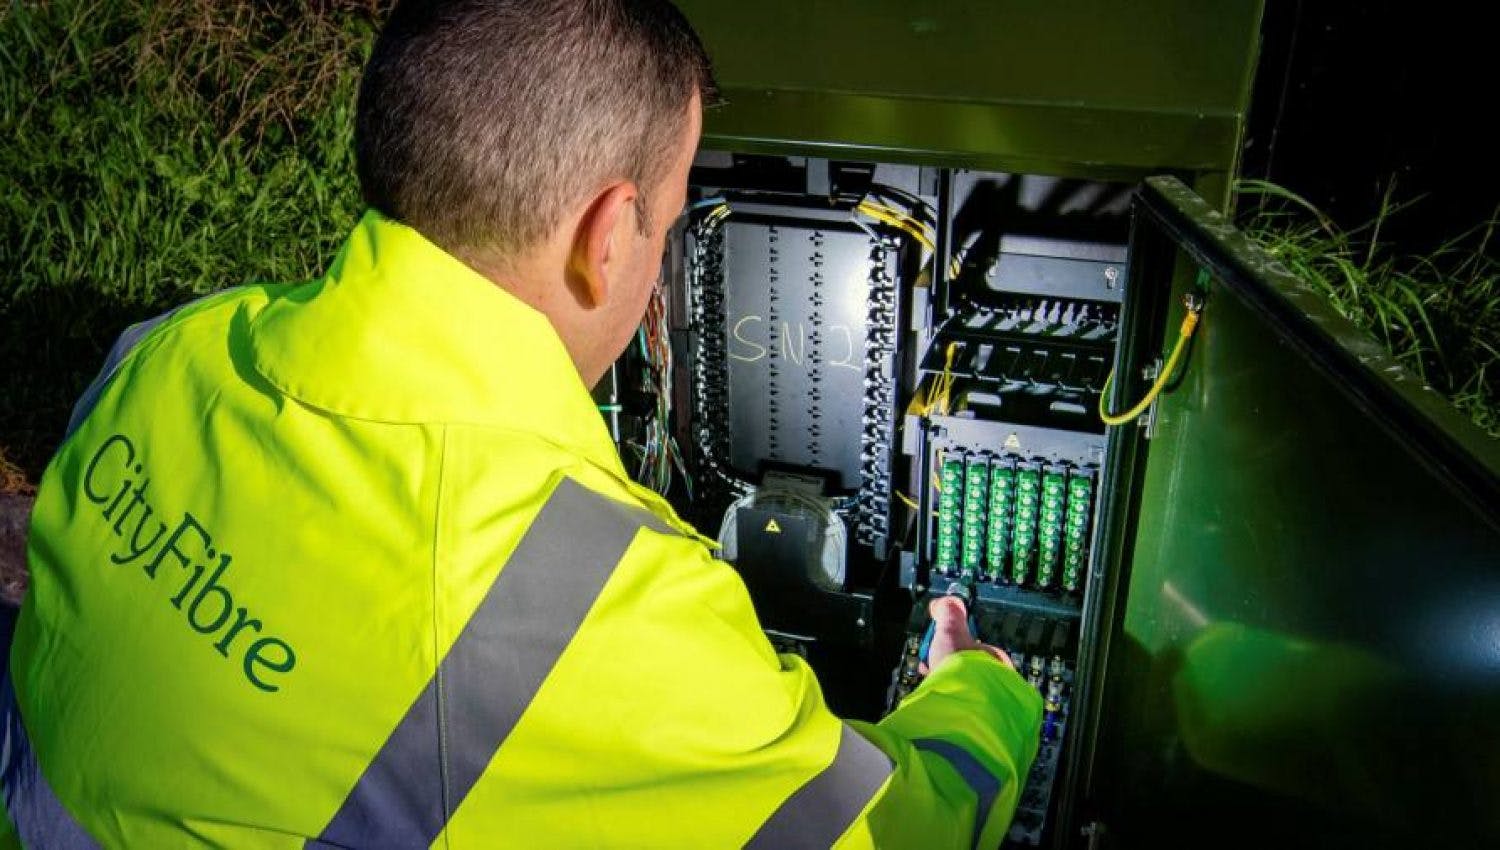 CityFibre field optic technician performing maintenance of a british electricity panel